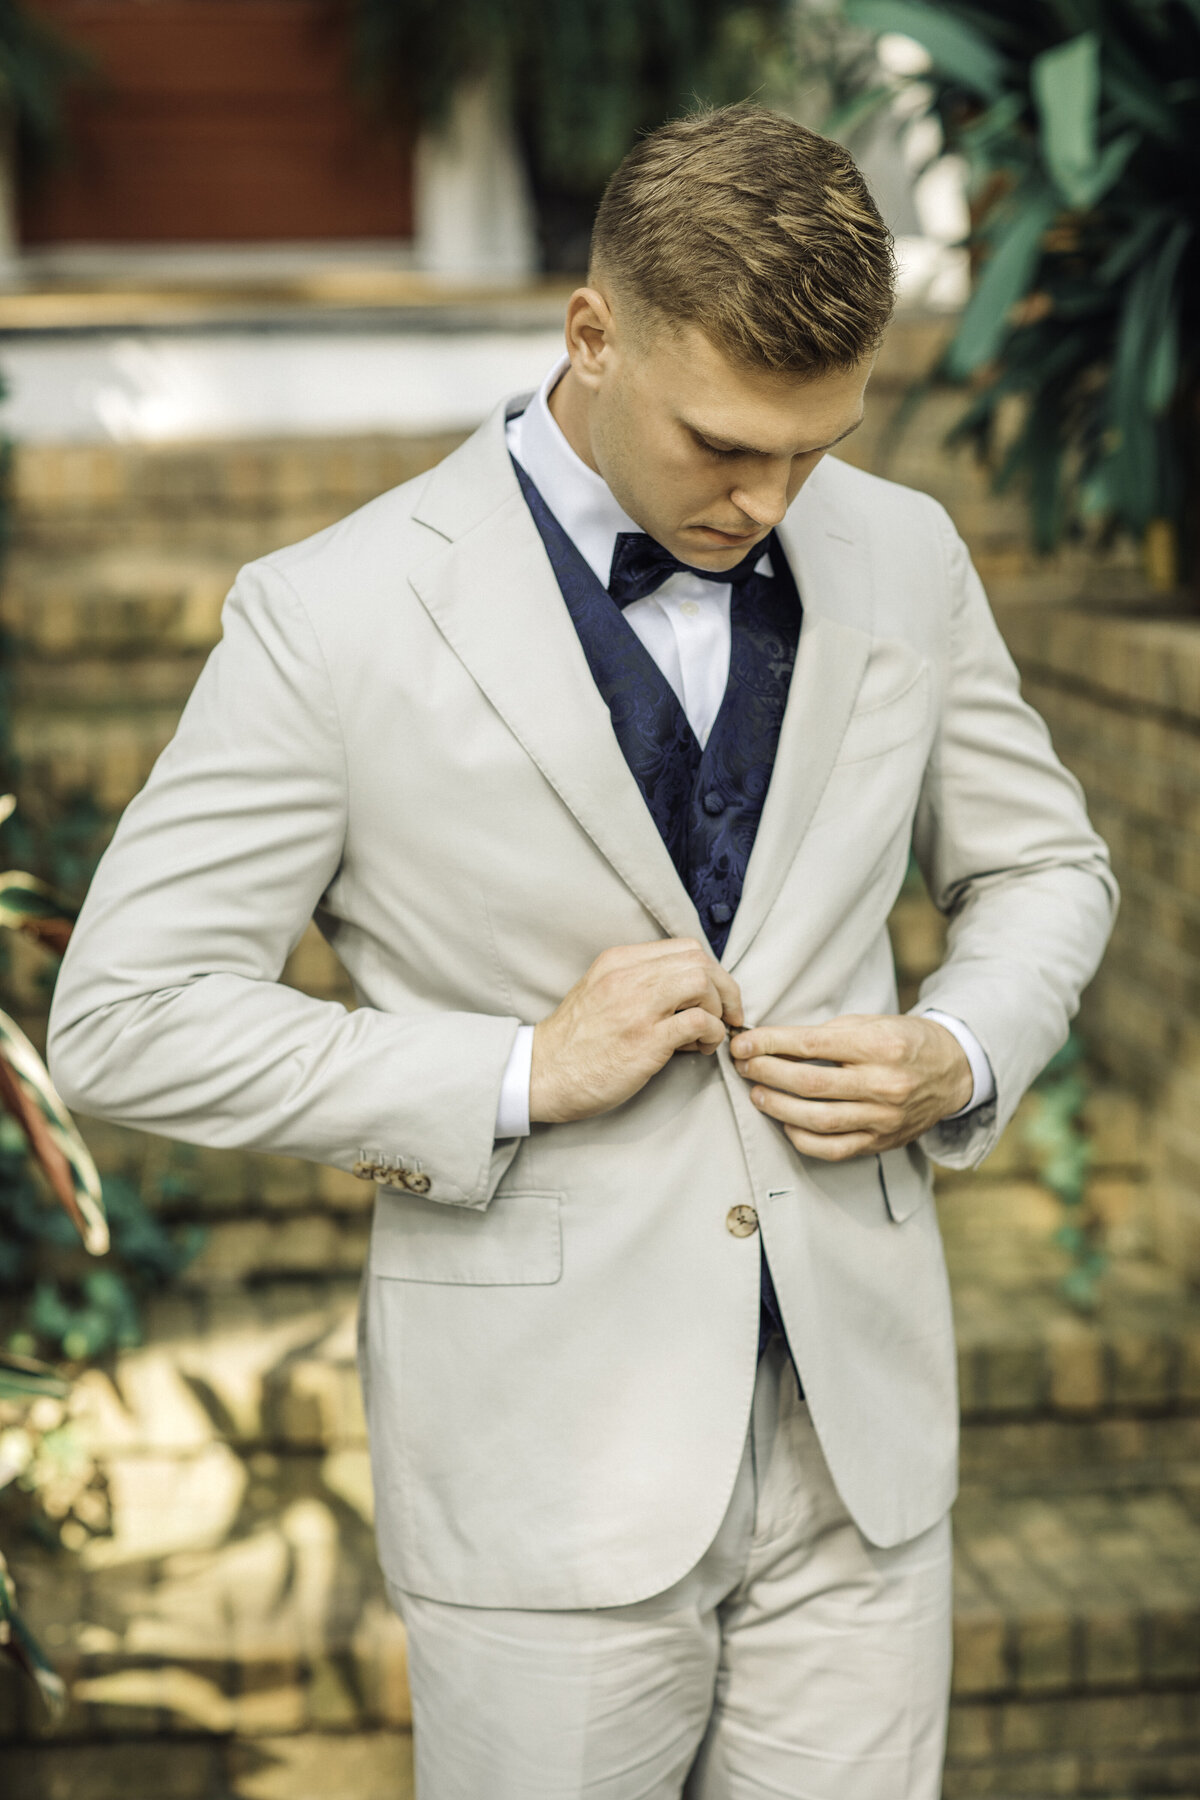 Wedding Photograph Of Groom Buttoning His Suit Los Angeles